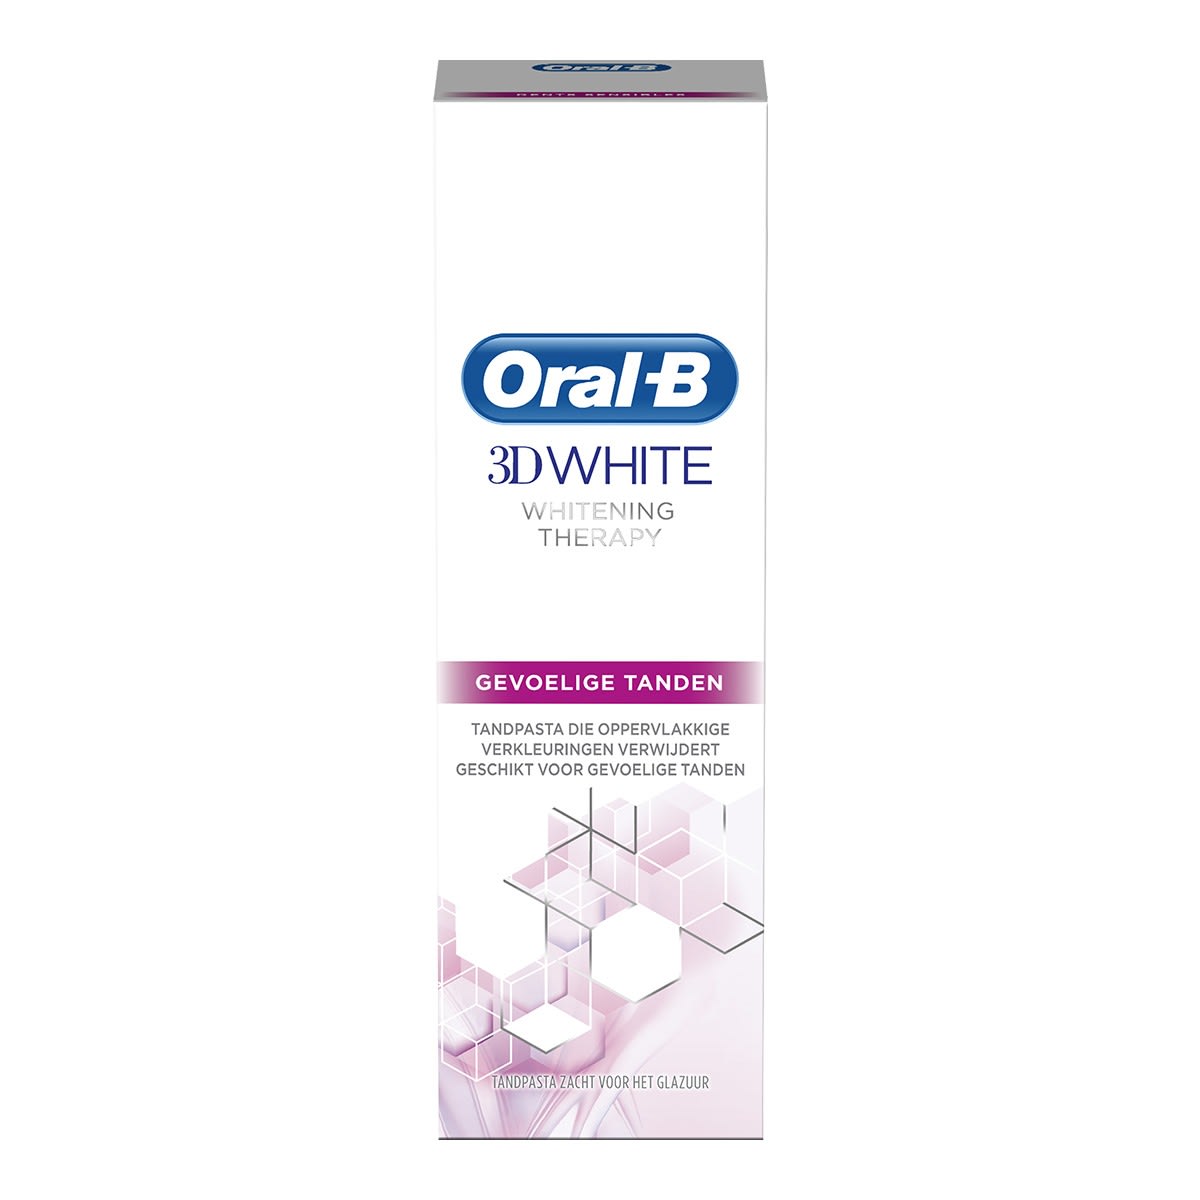 Mail Hijgend Hedendaags Oral-B 3D White Whitening Therapy gevoelige tanden | Oral-B